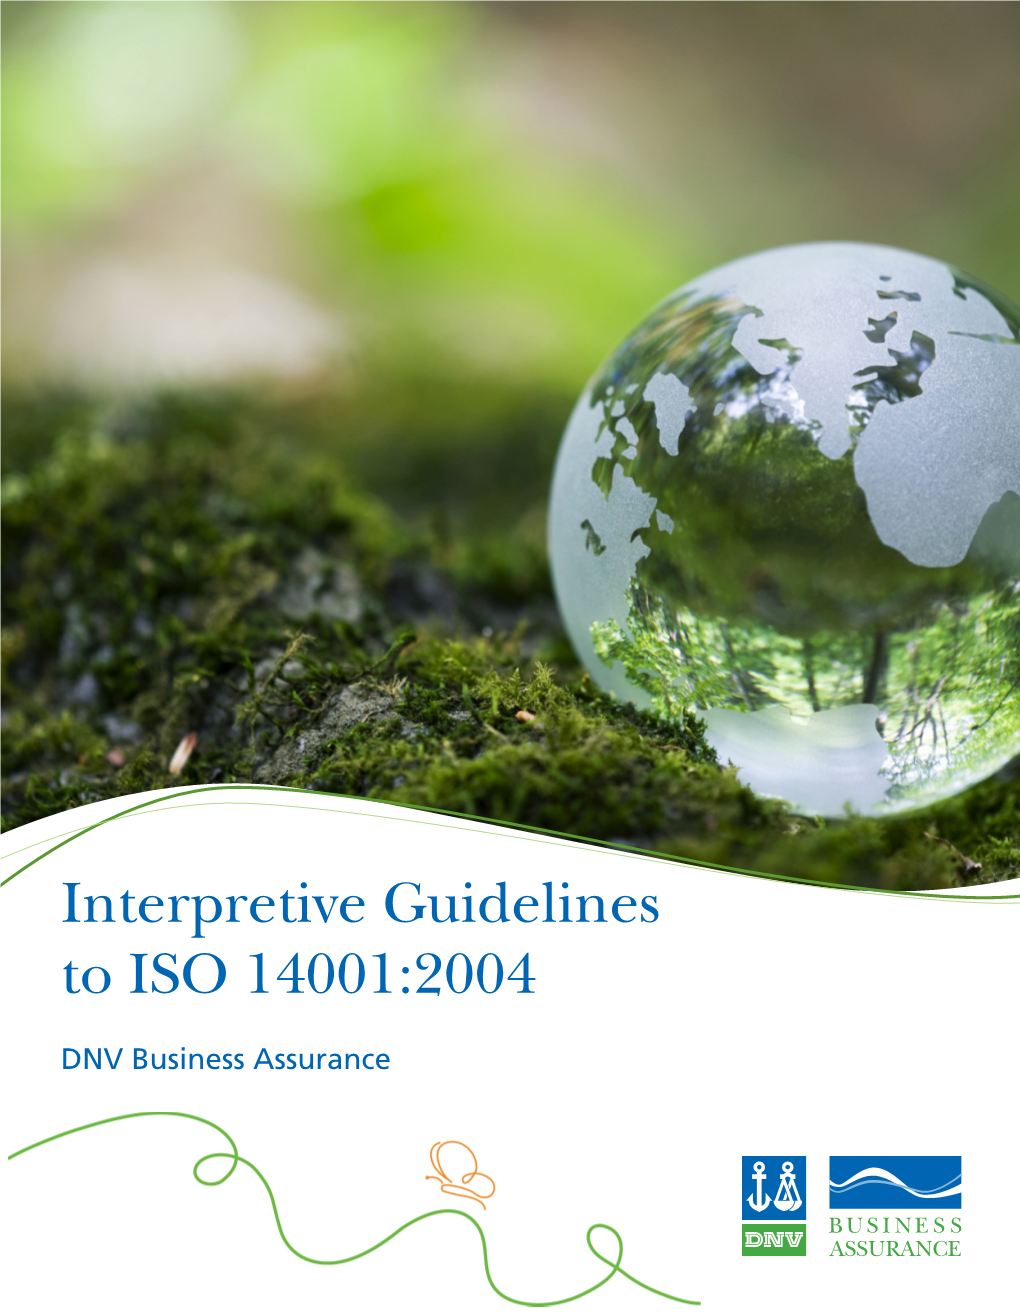 Interpretive Guidelines to ISO 14001:2004